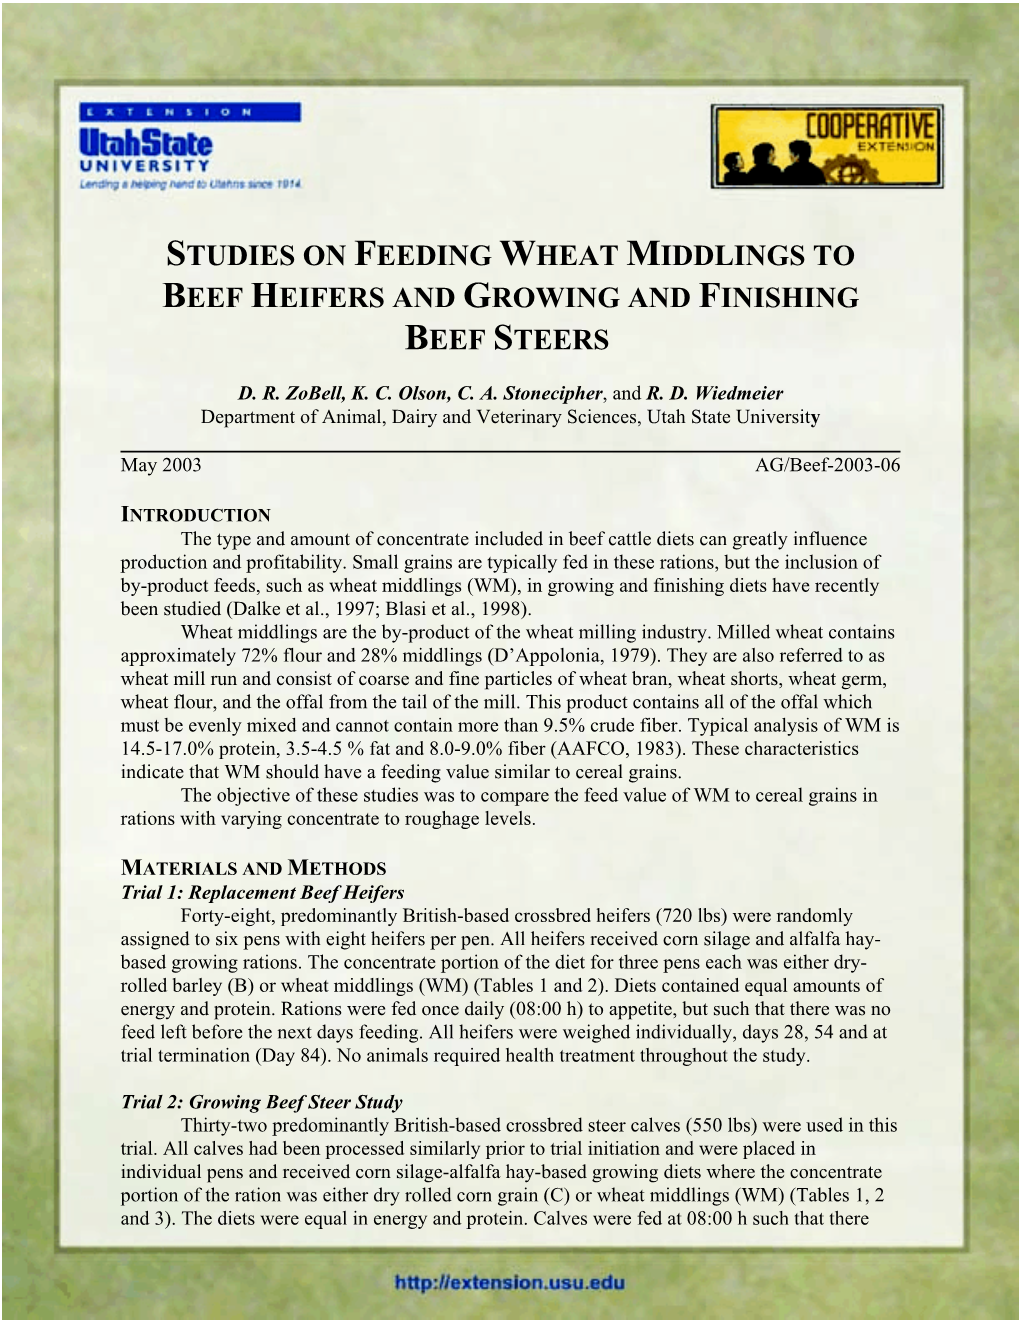 Studies on Feeding Wheat Middlings to Beef Heifers and Growing and Finishing Beef Steers